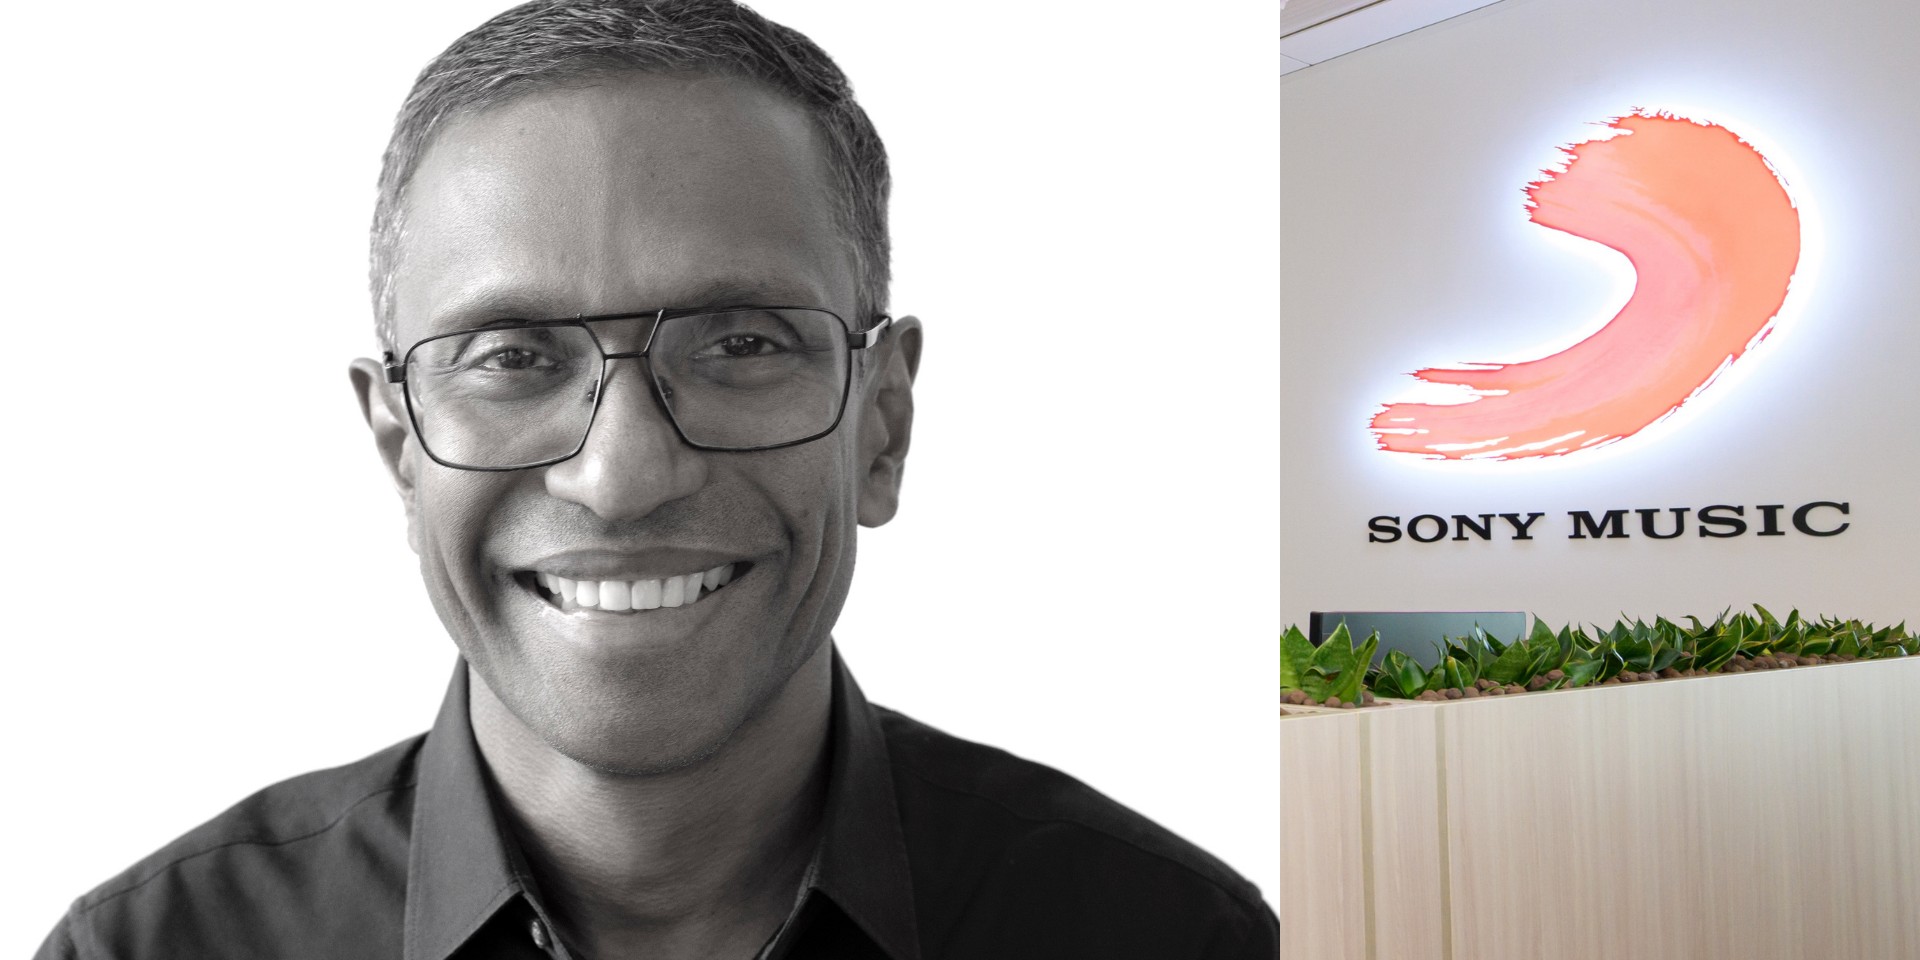 Sony Music's Shridhar Subramaniam on the rise of Asian music, working with NFTs, and what it takes to make it